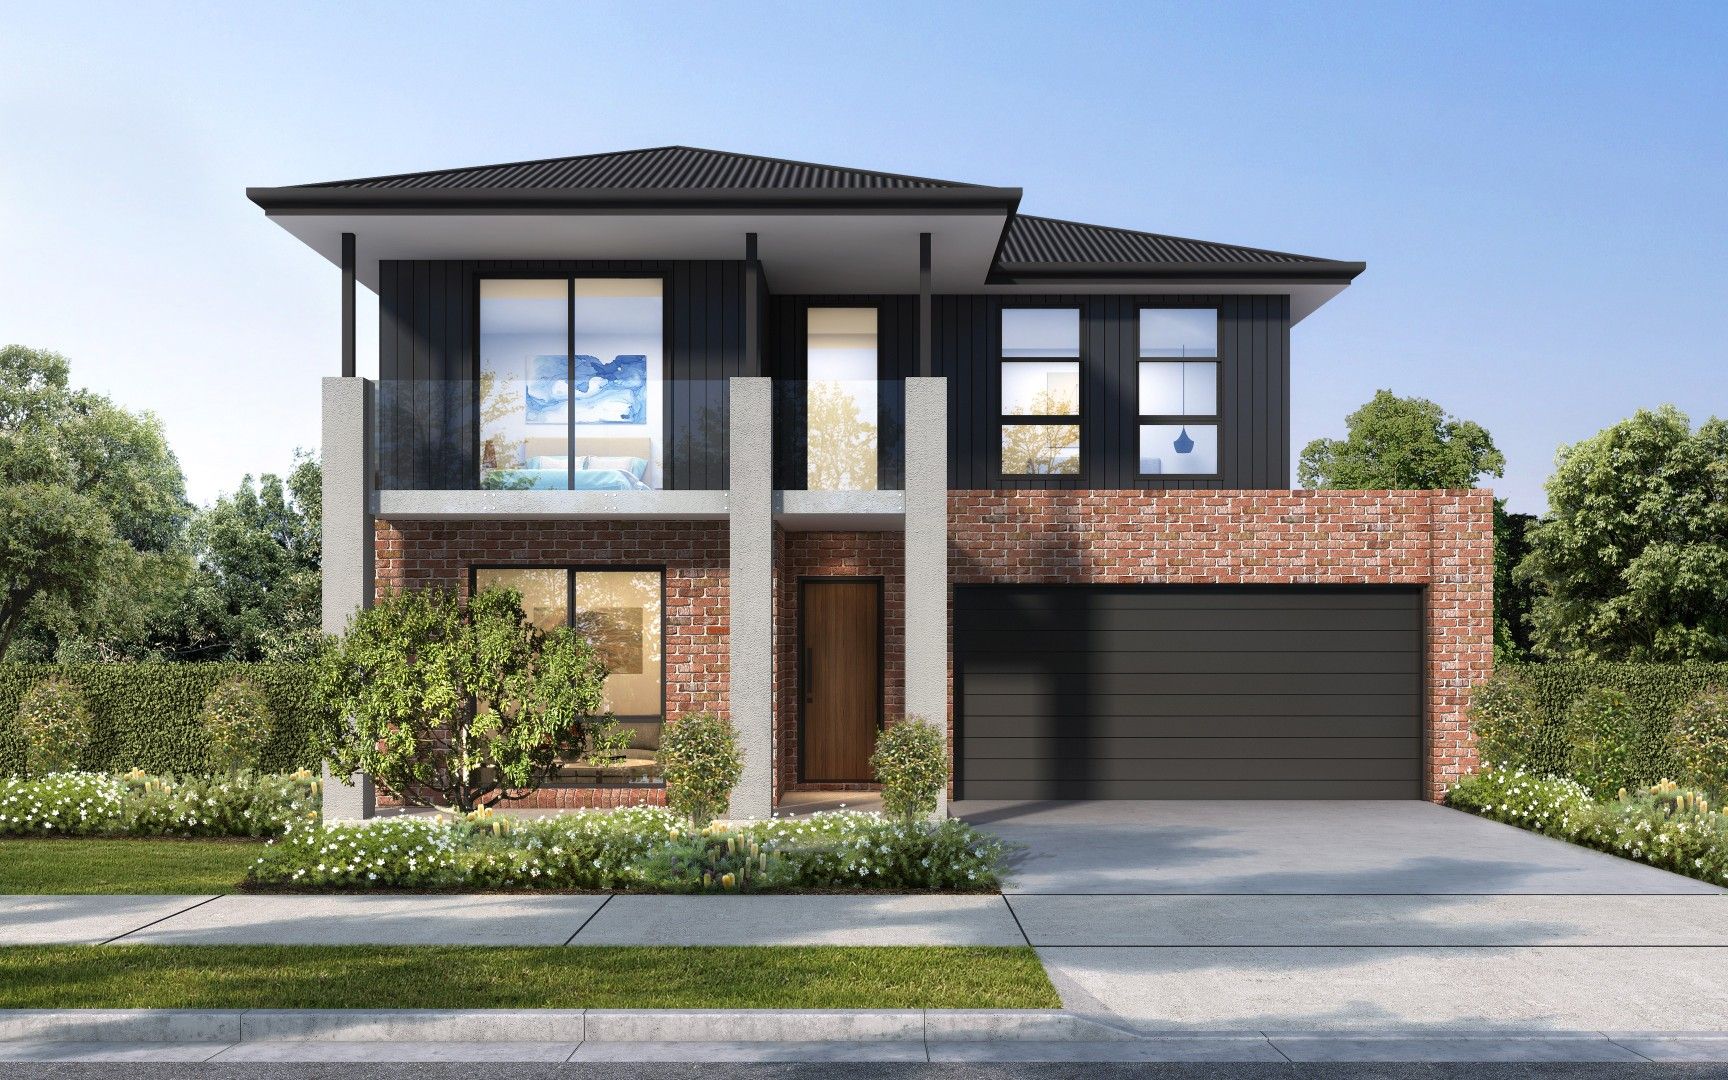 5 bedrooms New House & Land in Lot 21 Coliban Street GLEDSWOOD HILLS NSW, 2557